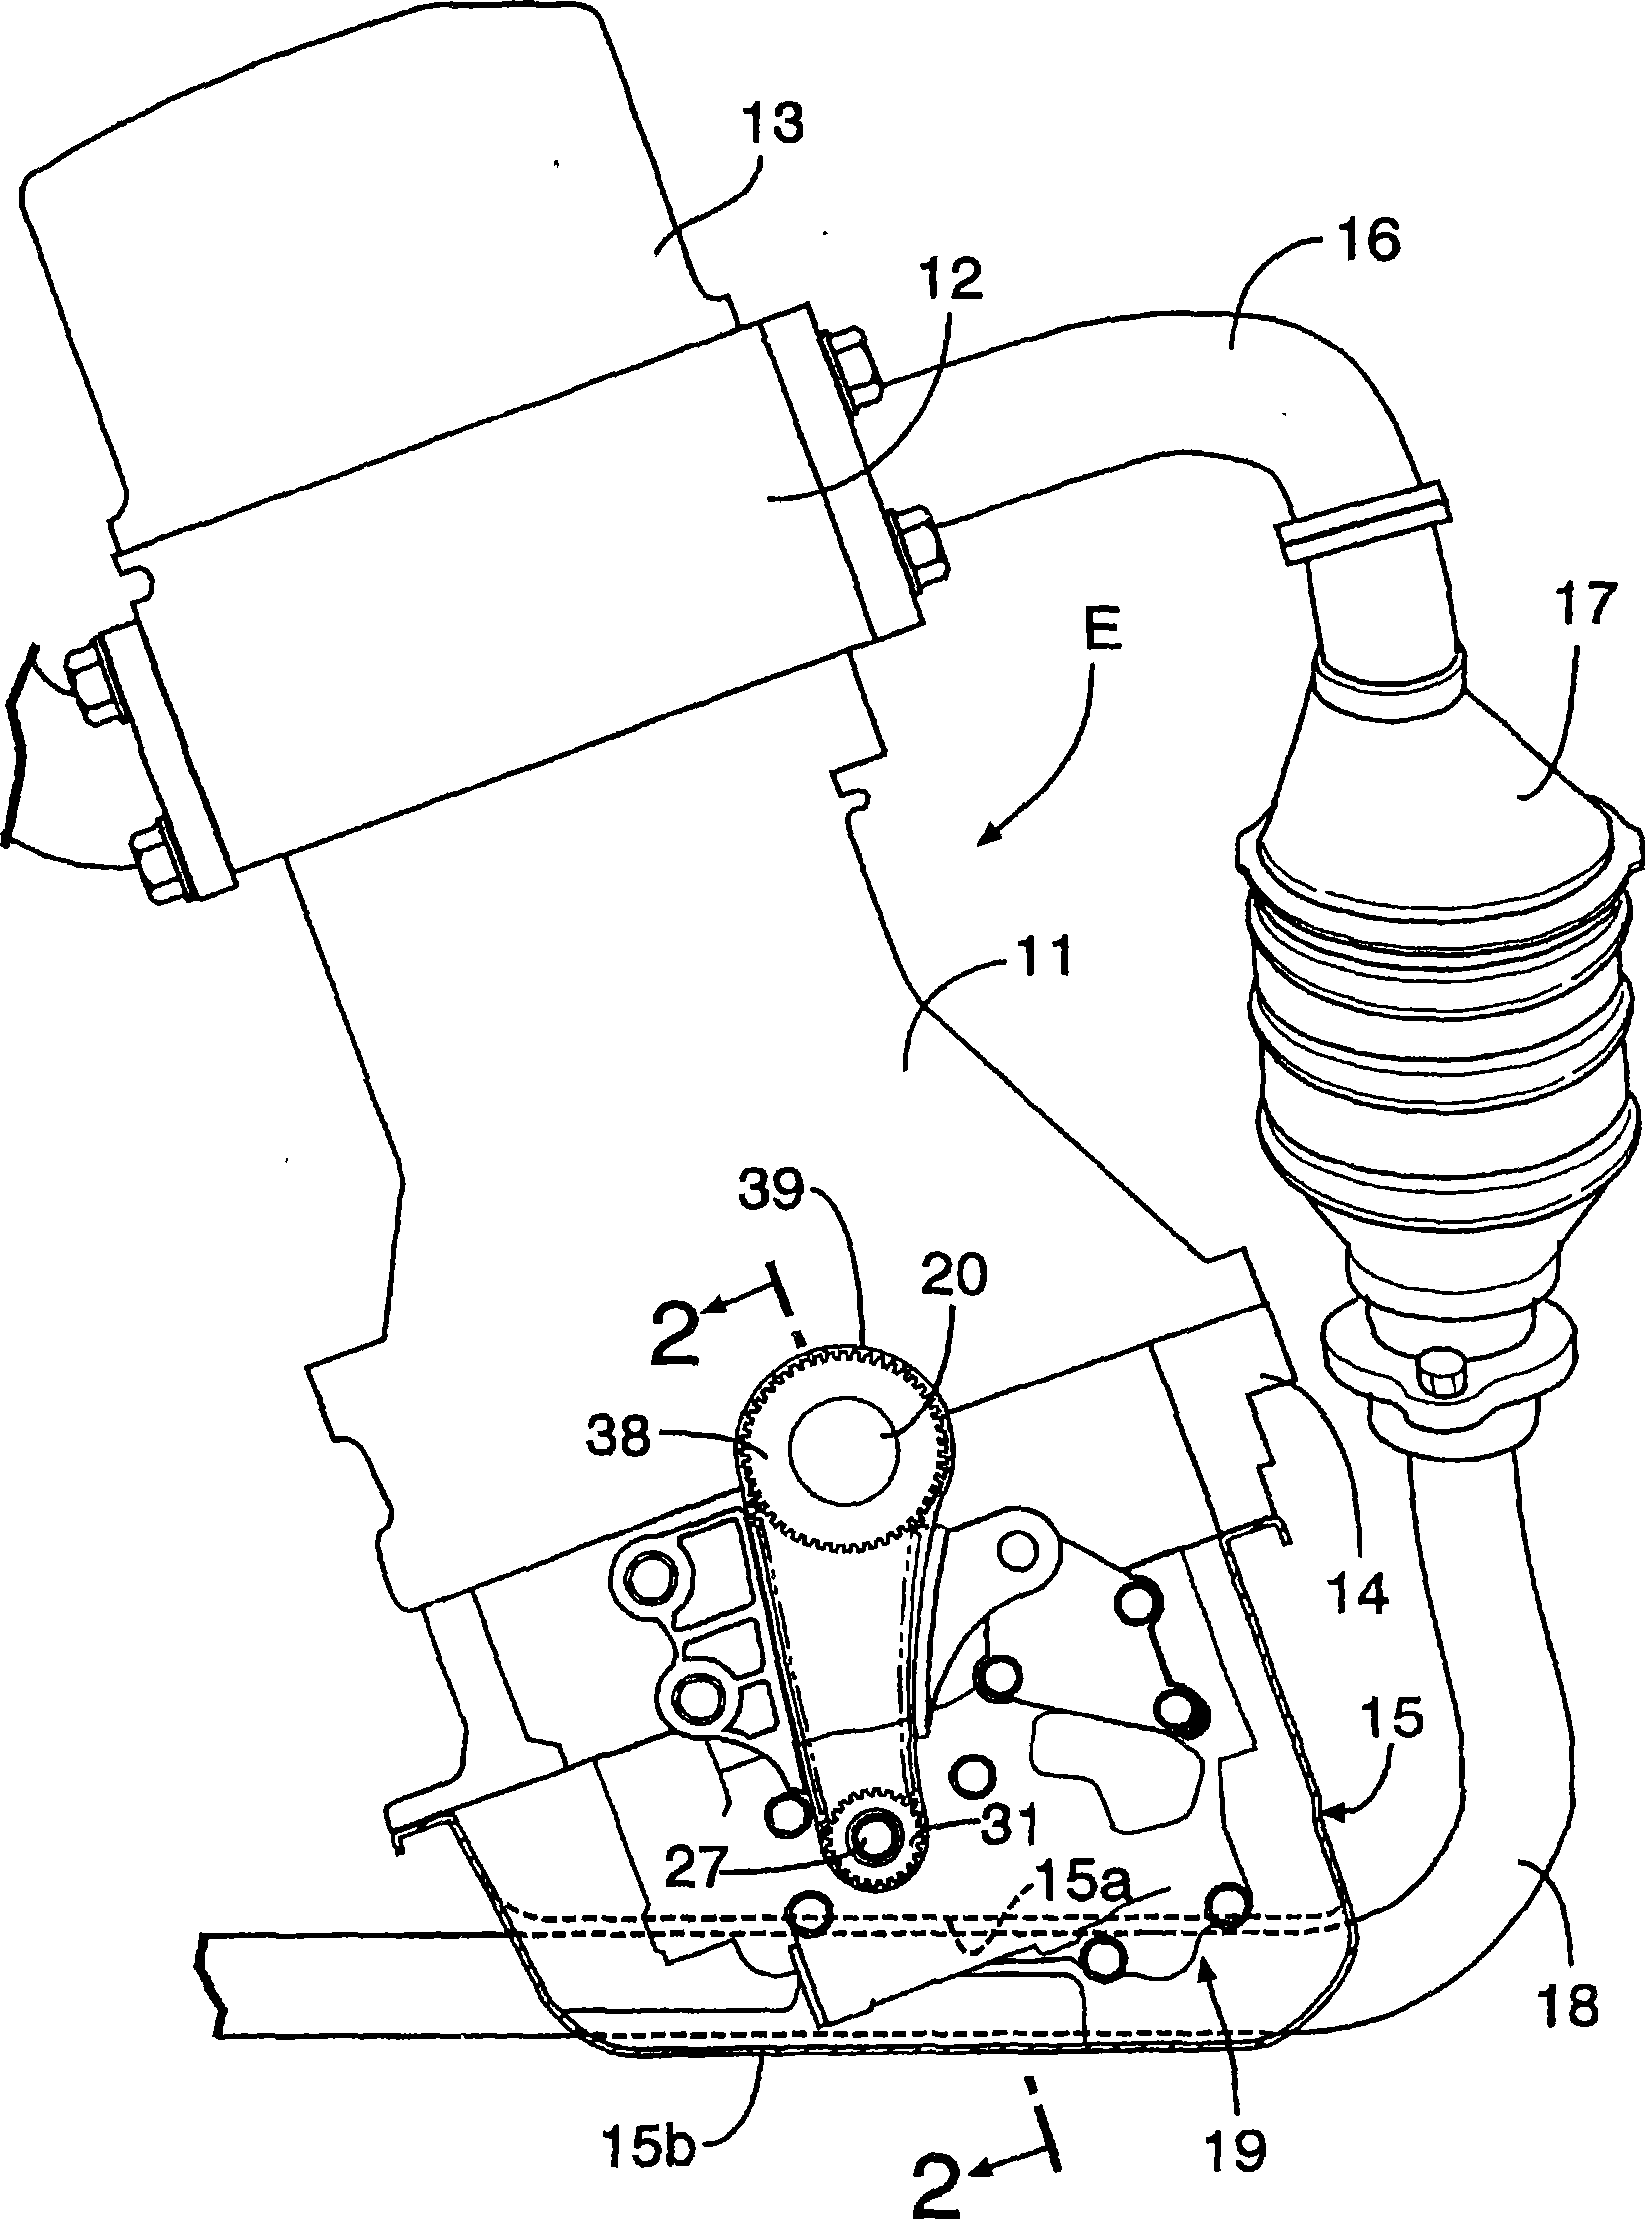 Oil sensor placement structure of engine